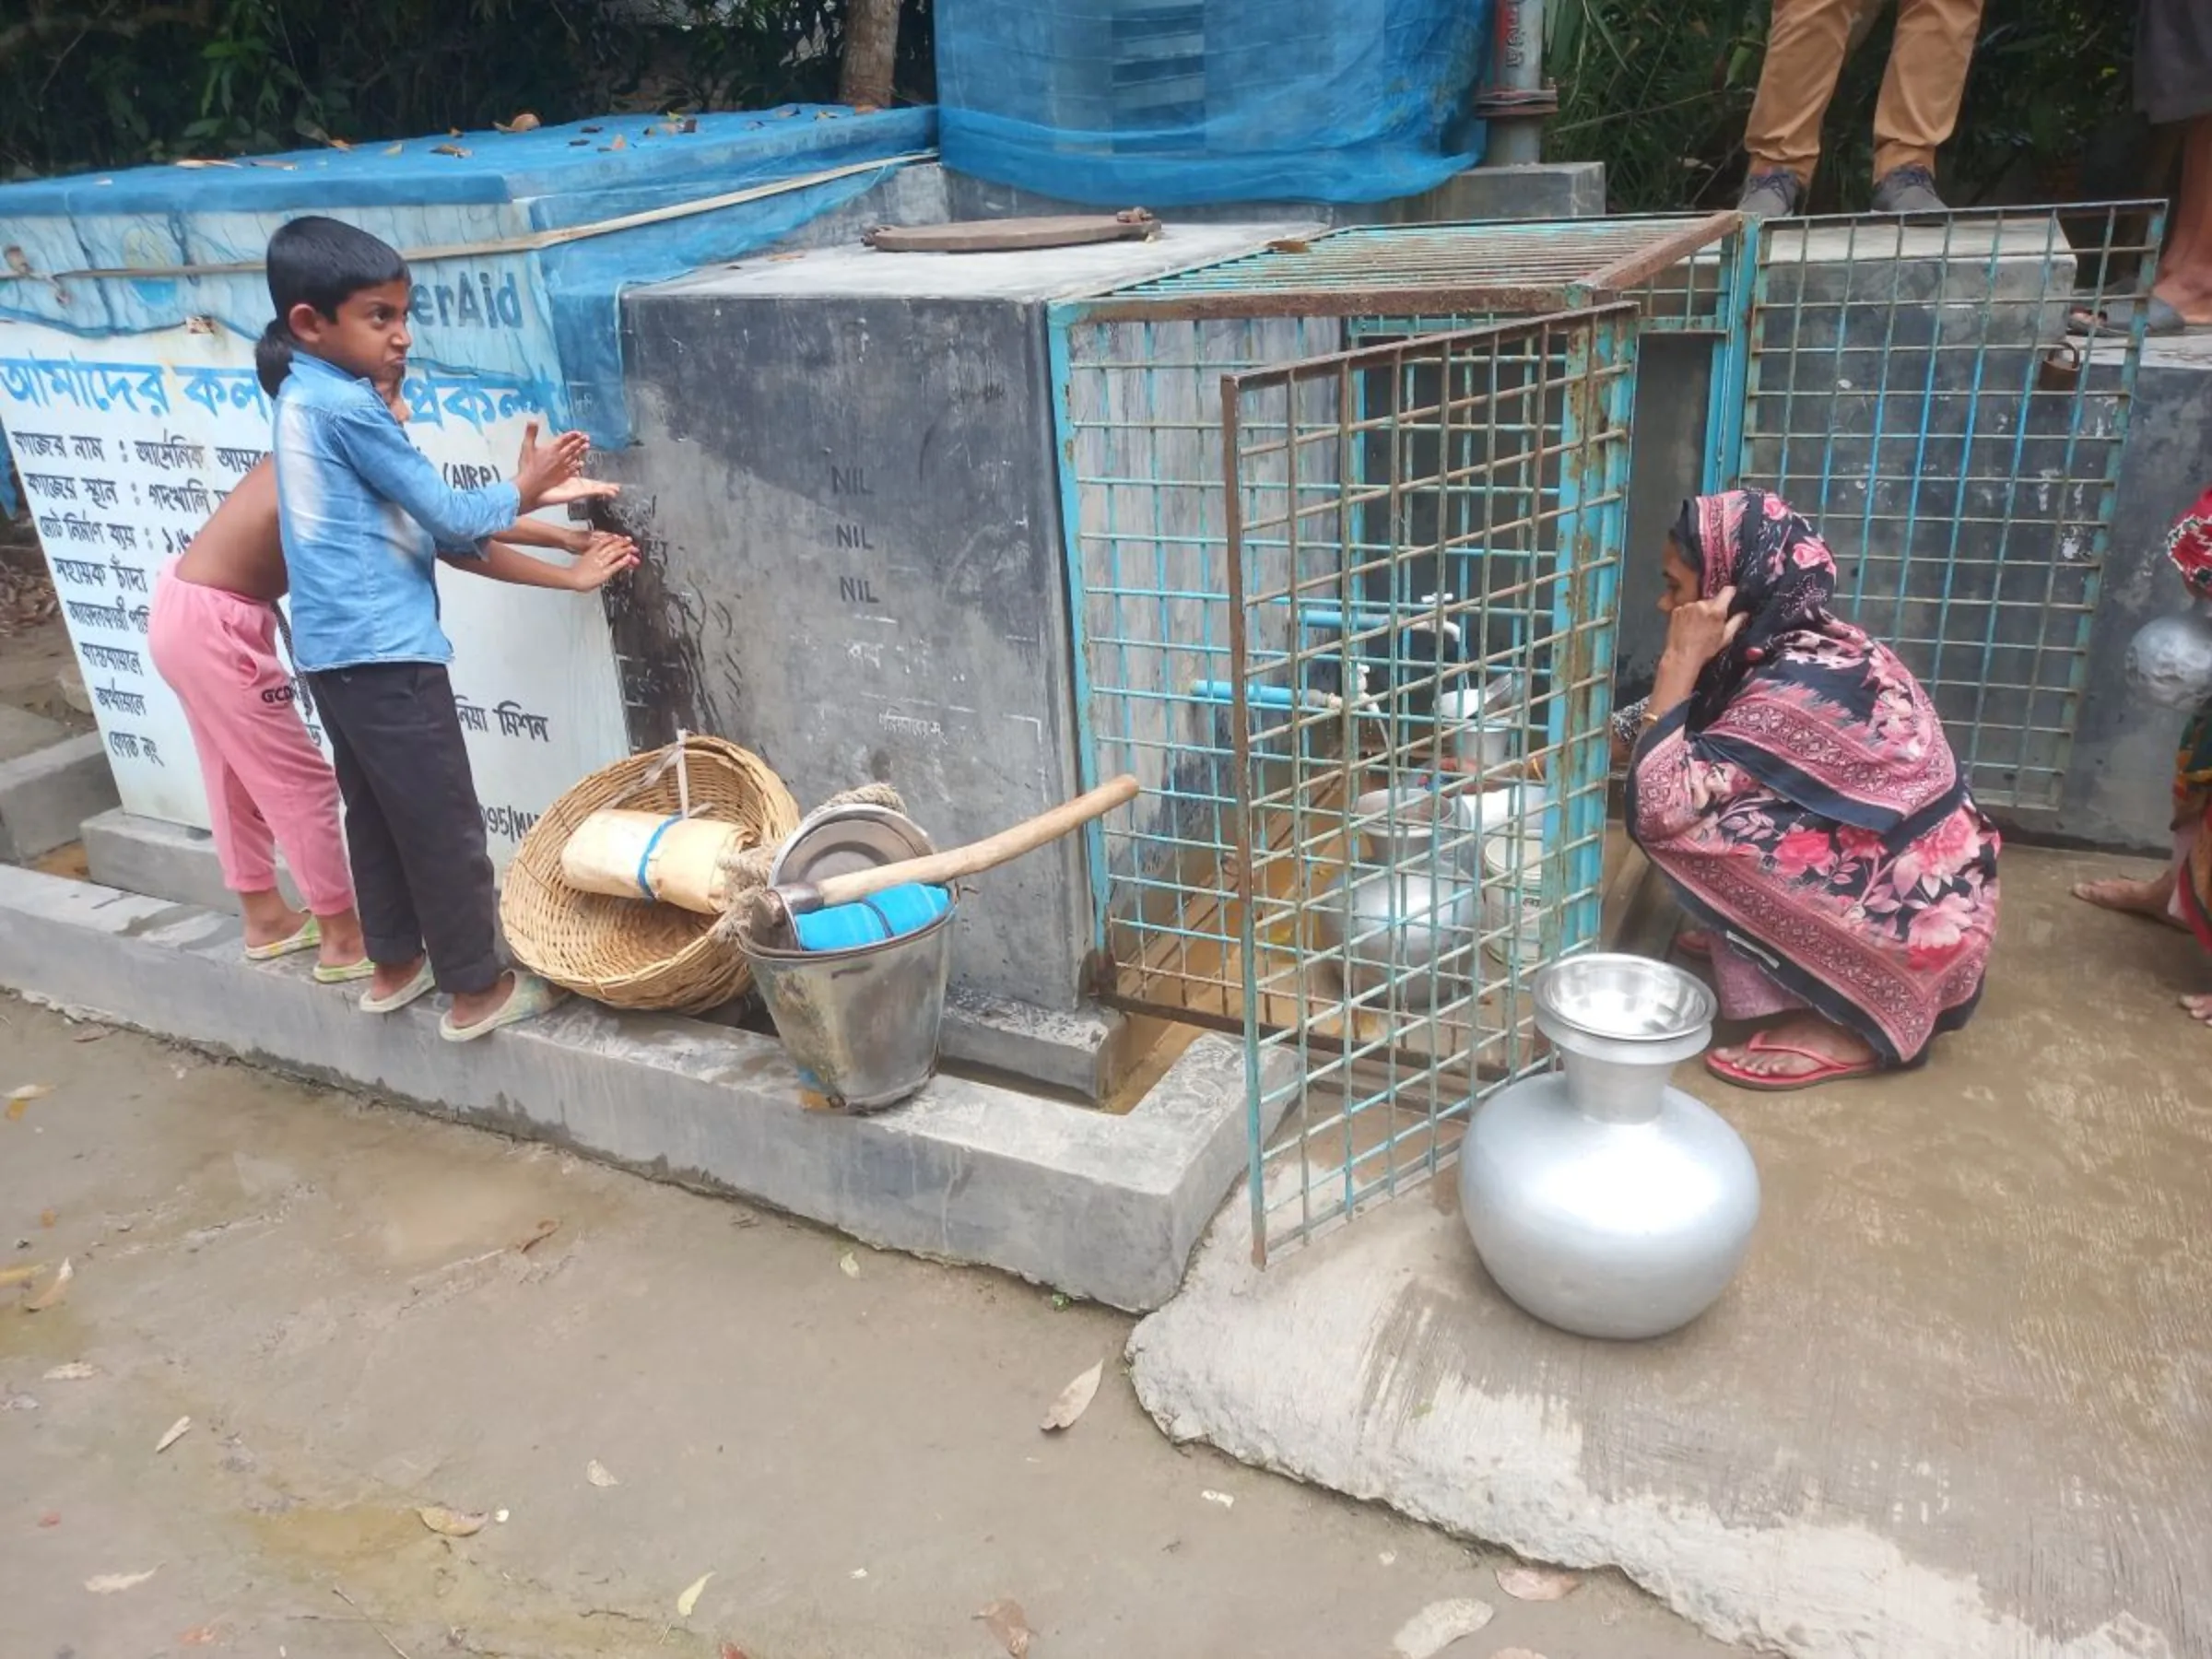 Children stand next to a water facility as a woman crouches to fill up silver pots